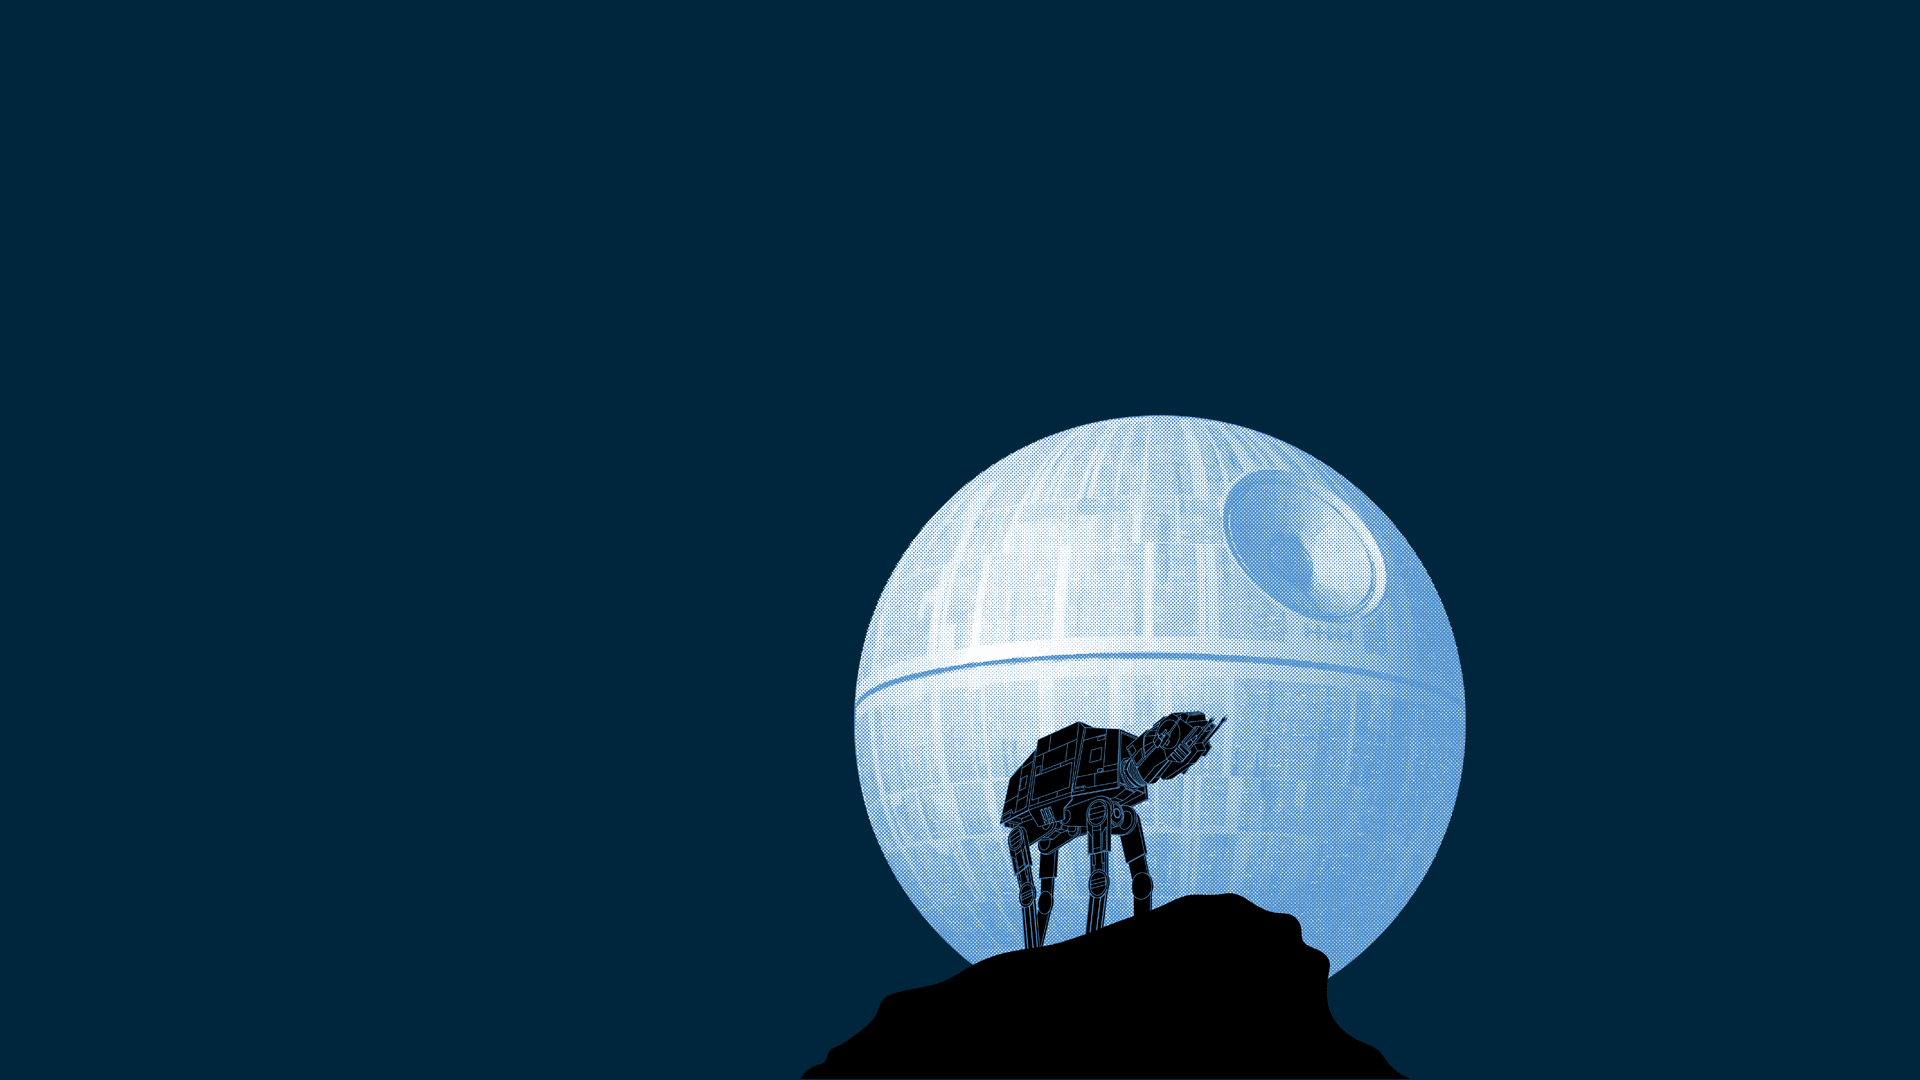 Death Star Wallpapers - Wallpaper Cave